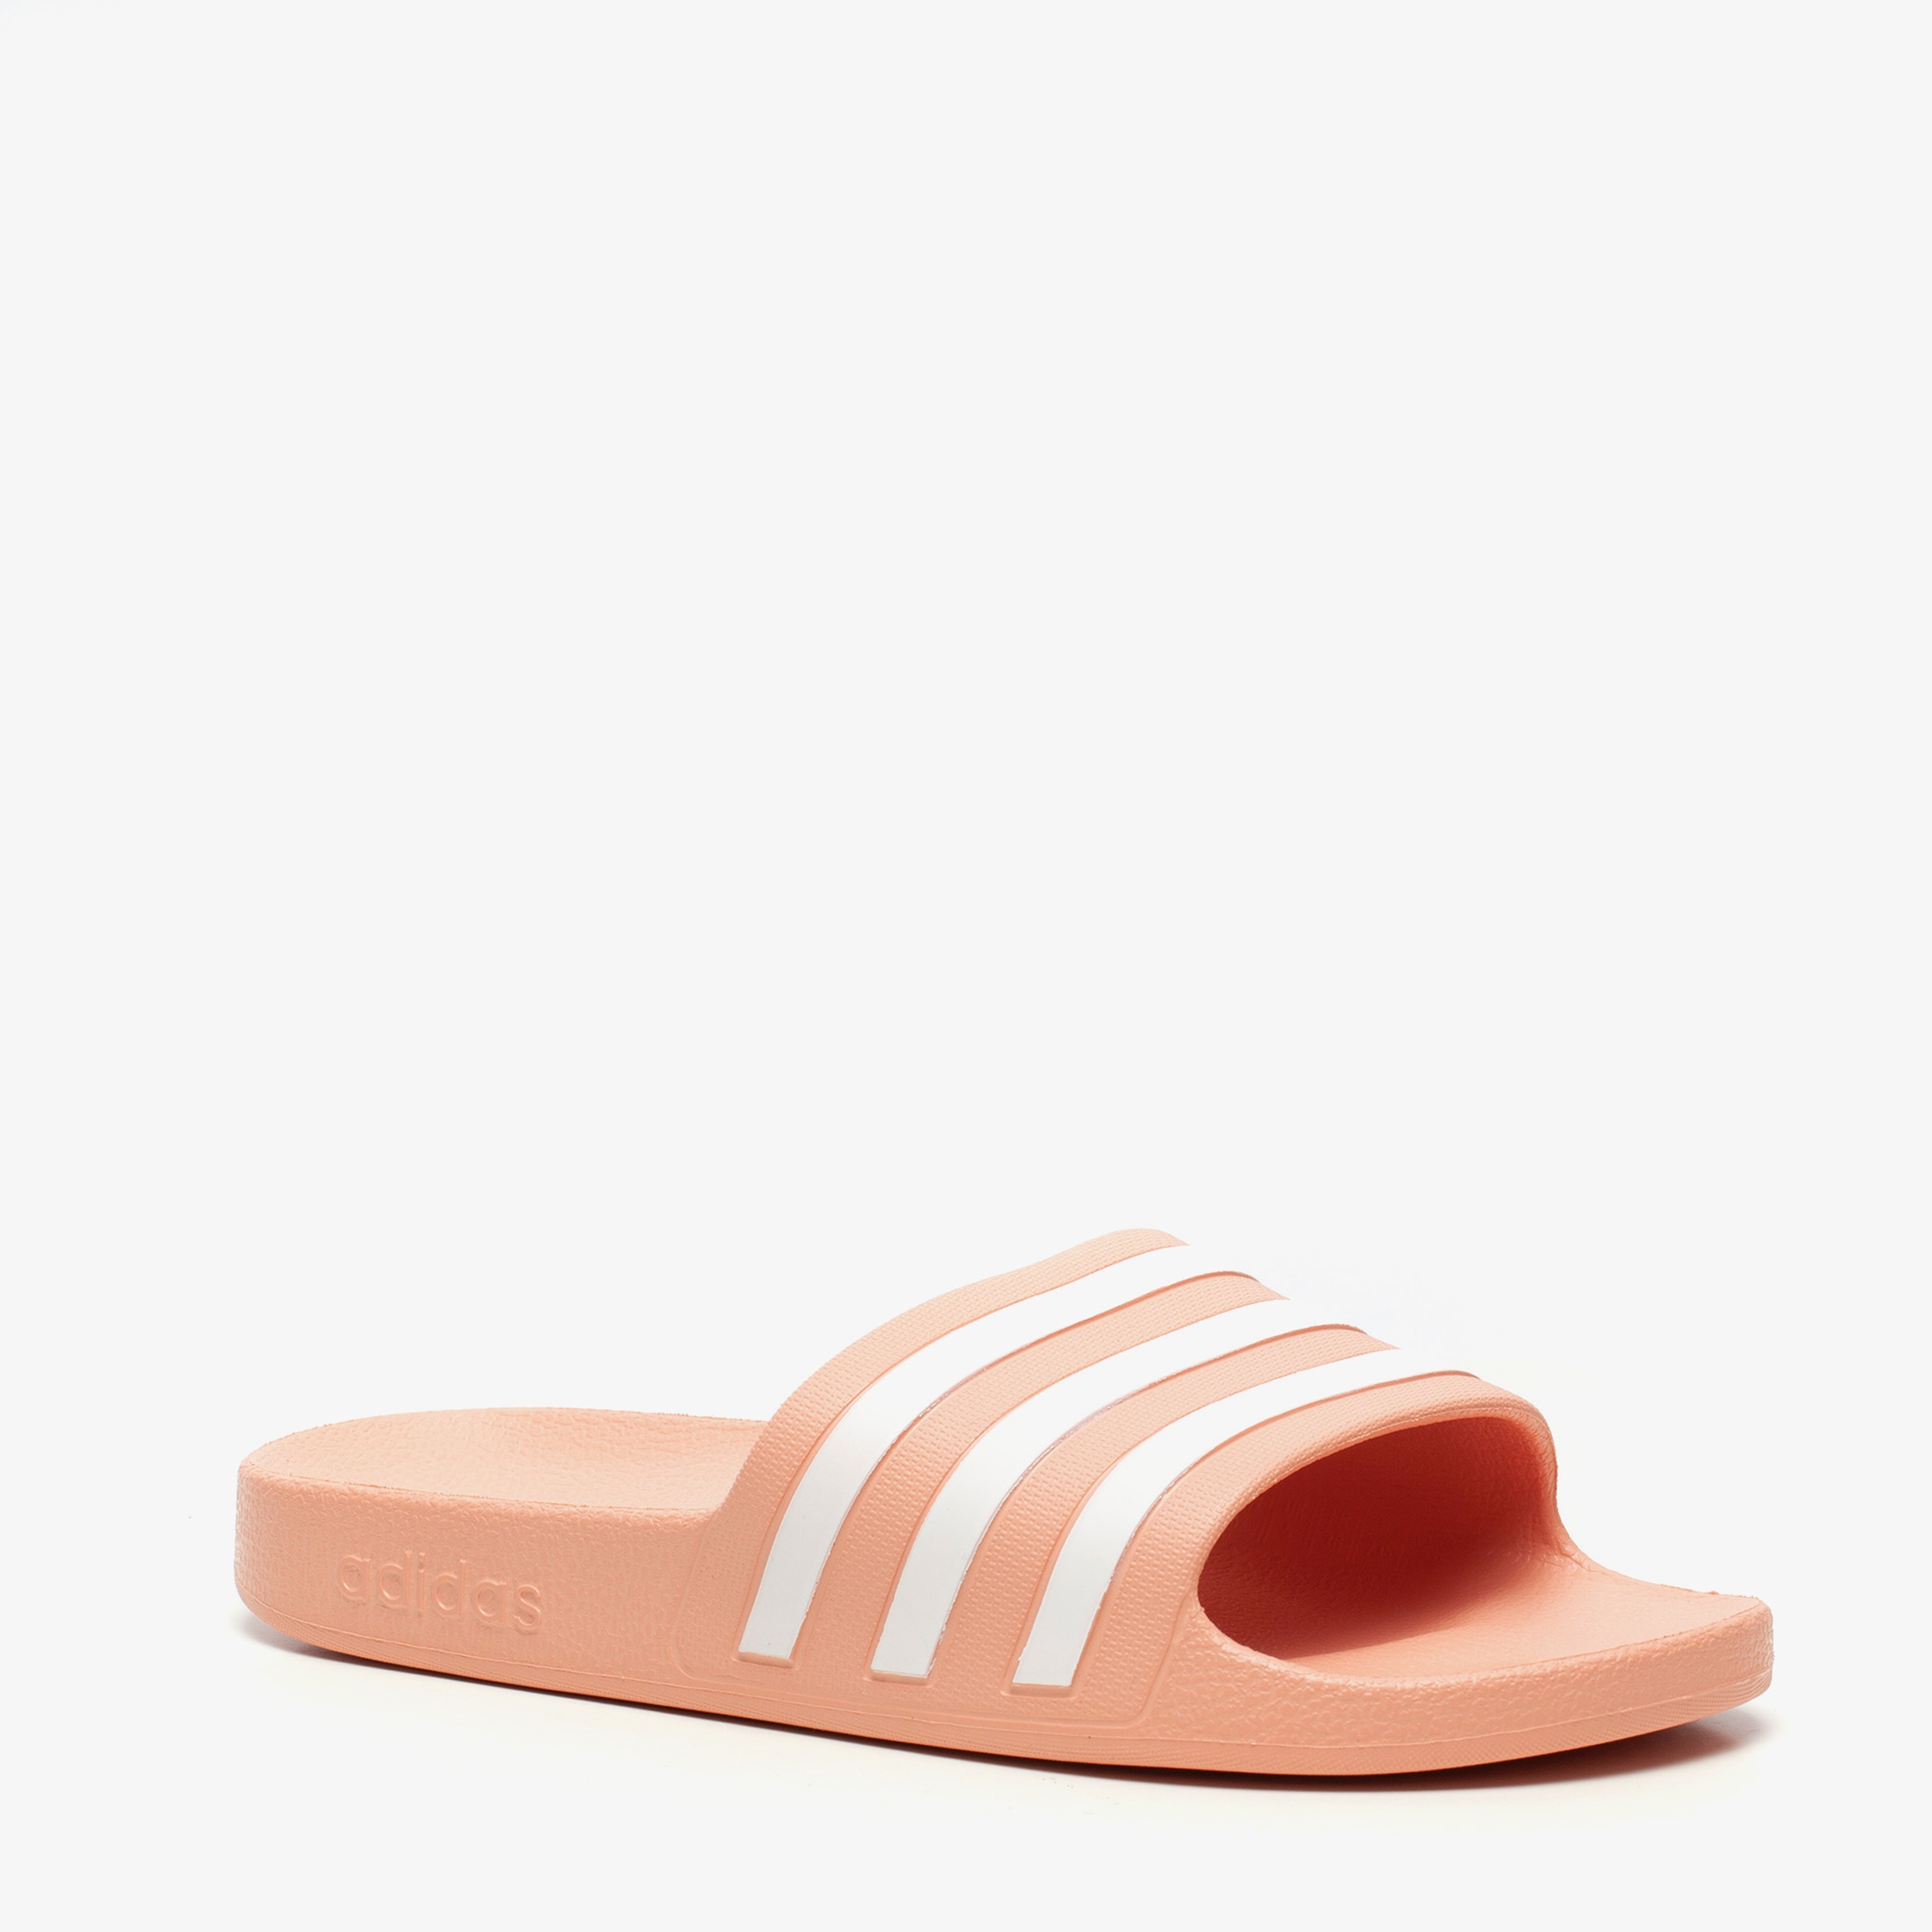 Buy > roze adidas slippers > in stock